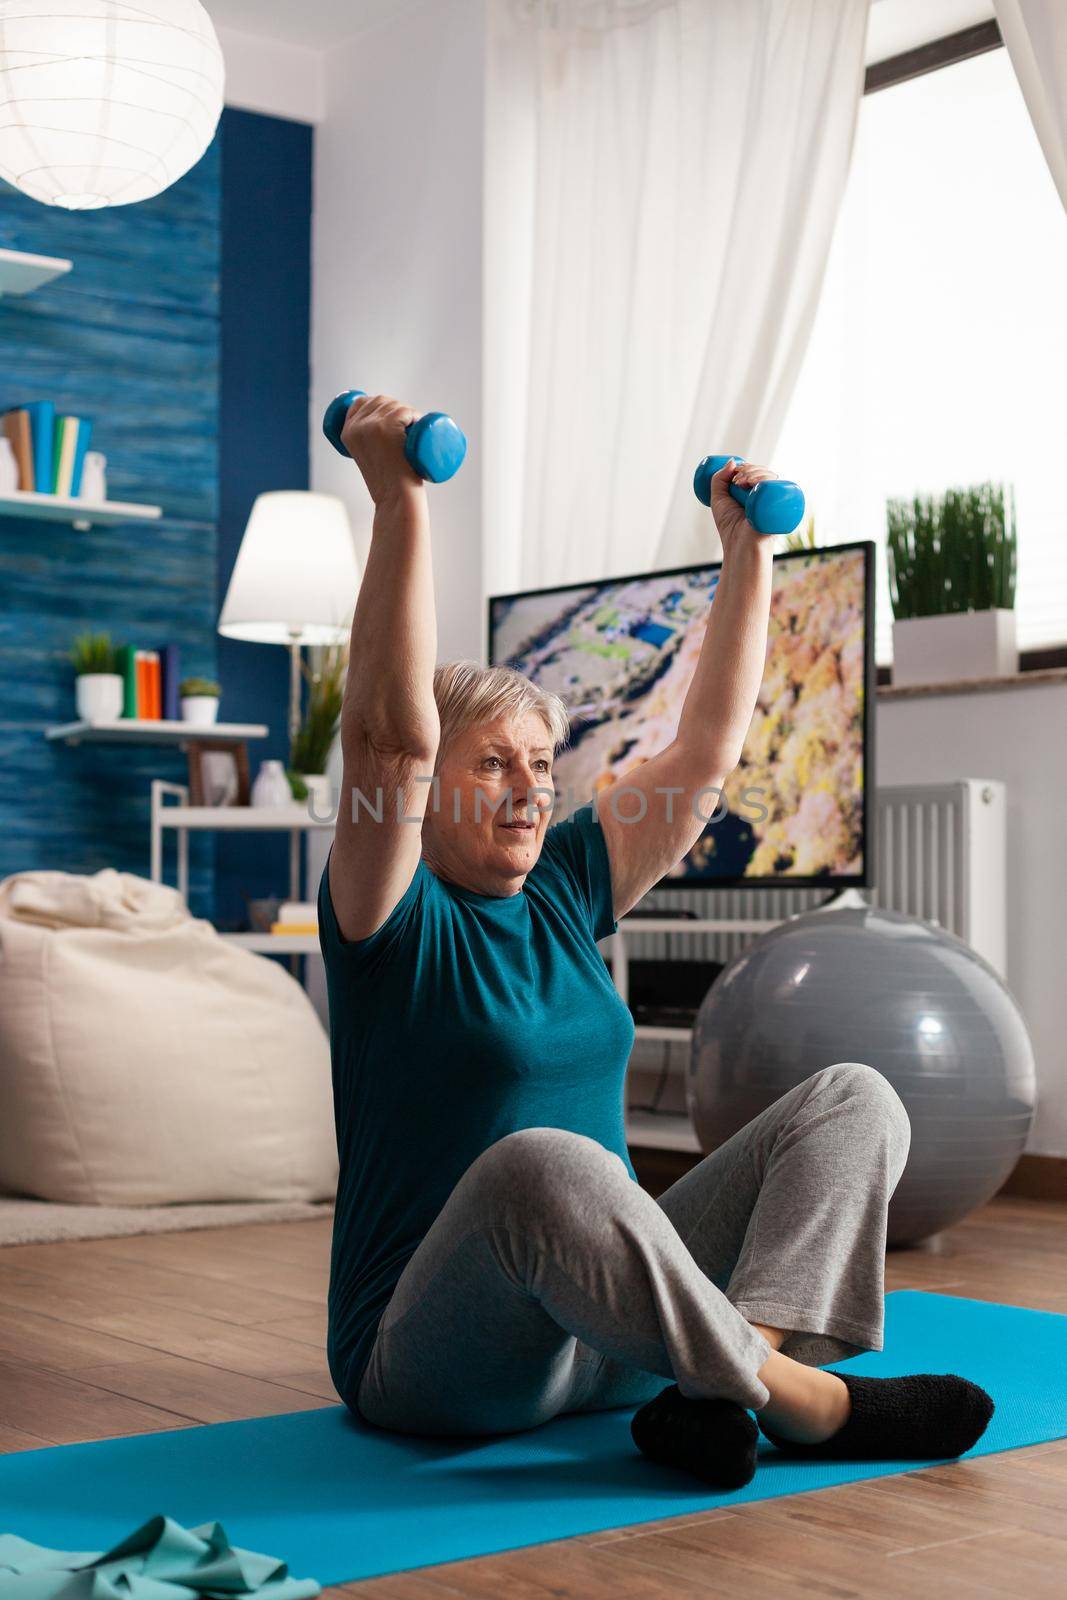 Retired senior woman sitting on yoga mat in lotus position raising hands streching arm muscle doing fitness exercise using dumbbells during wellness workout. Athlete pensioner slimming weight